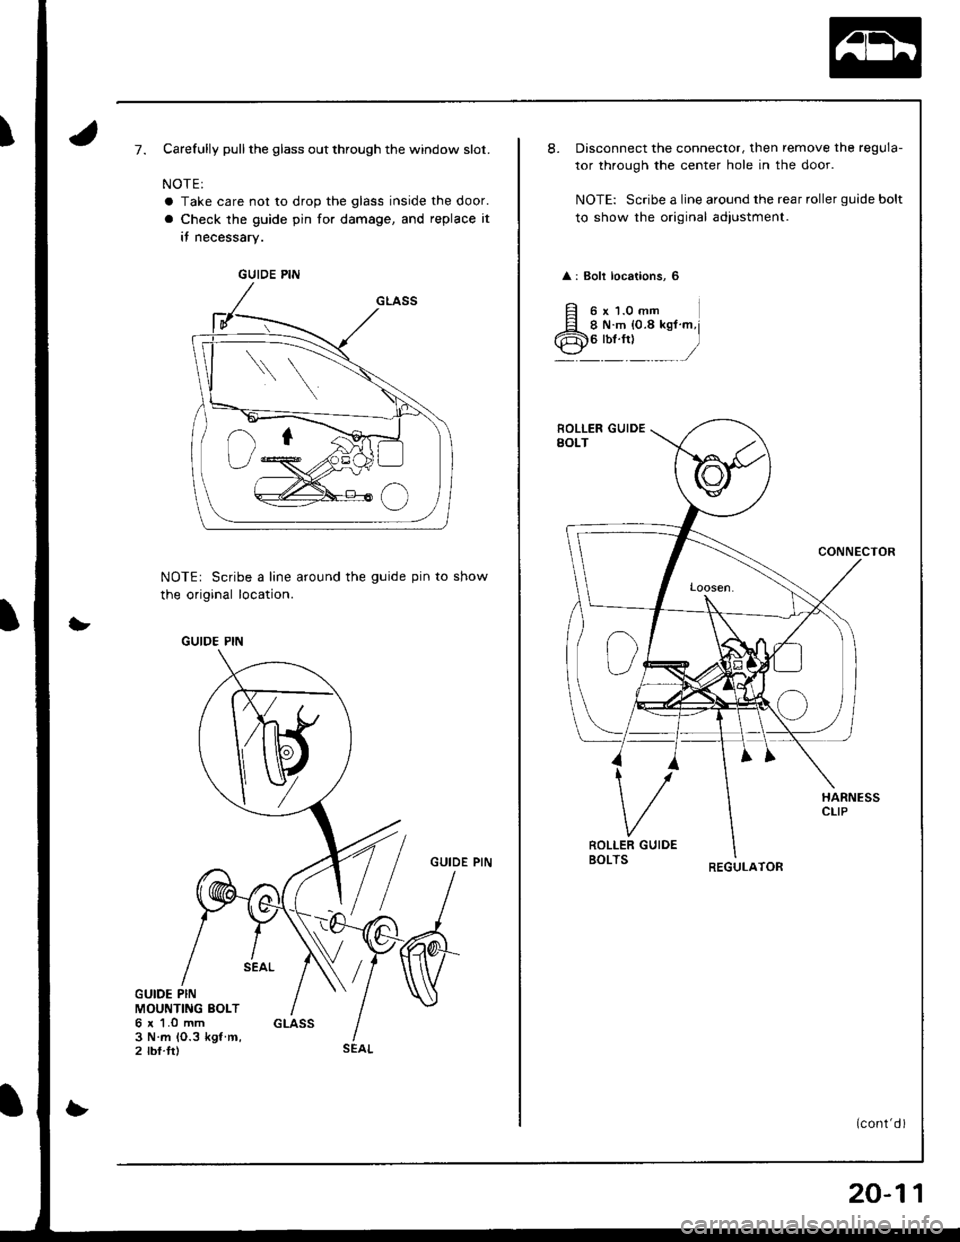 ACURA INTEGRA 1998  Service Repair Manual )7.Carefully pull the glass out through the window slot.
NOTE:
a Take care not to drop the glass inside the door.
a Check the guide pin for damage, and replace it
it necessary.
NOTEr Scribe a line aro